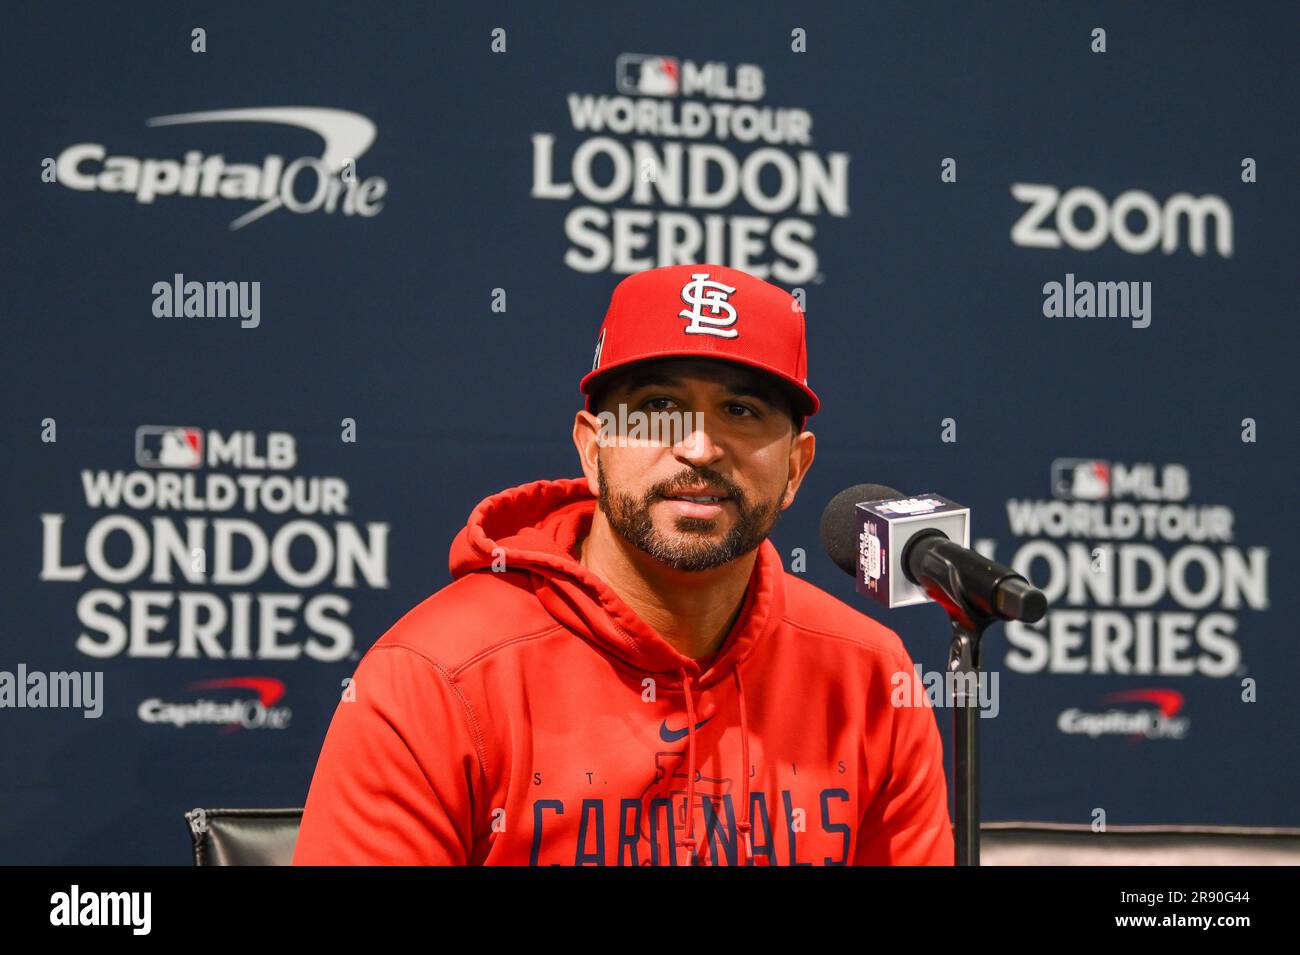 St Louis Cardinals manager says MLB London Series exceeded his